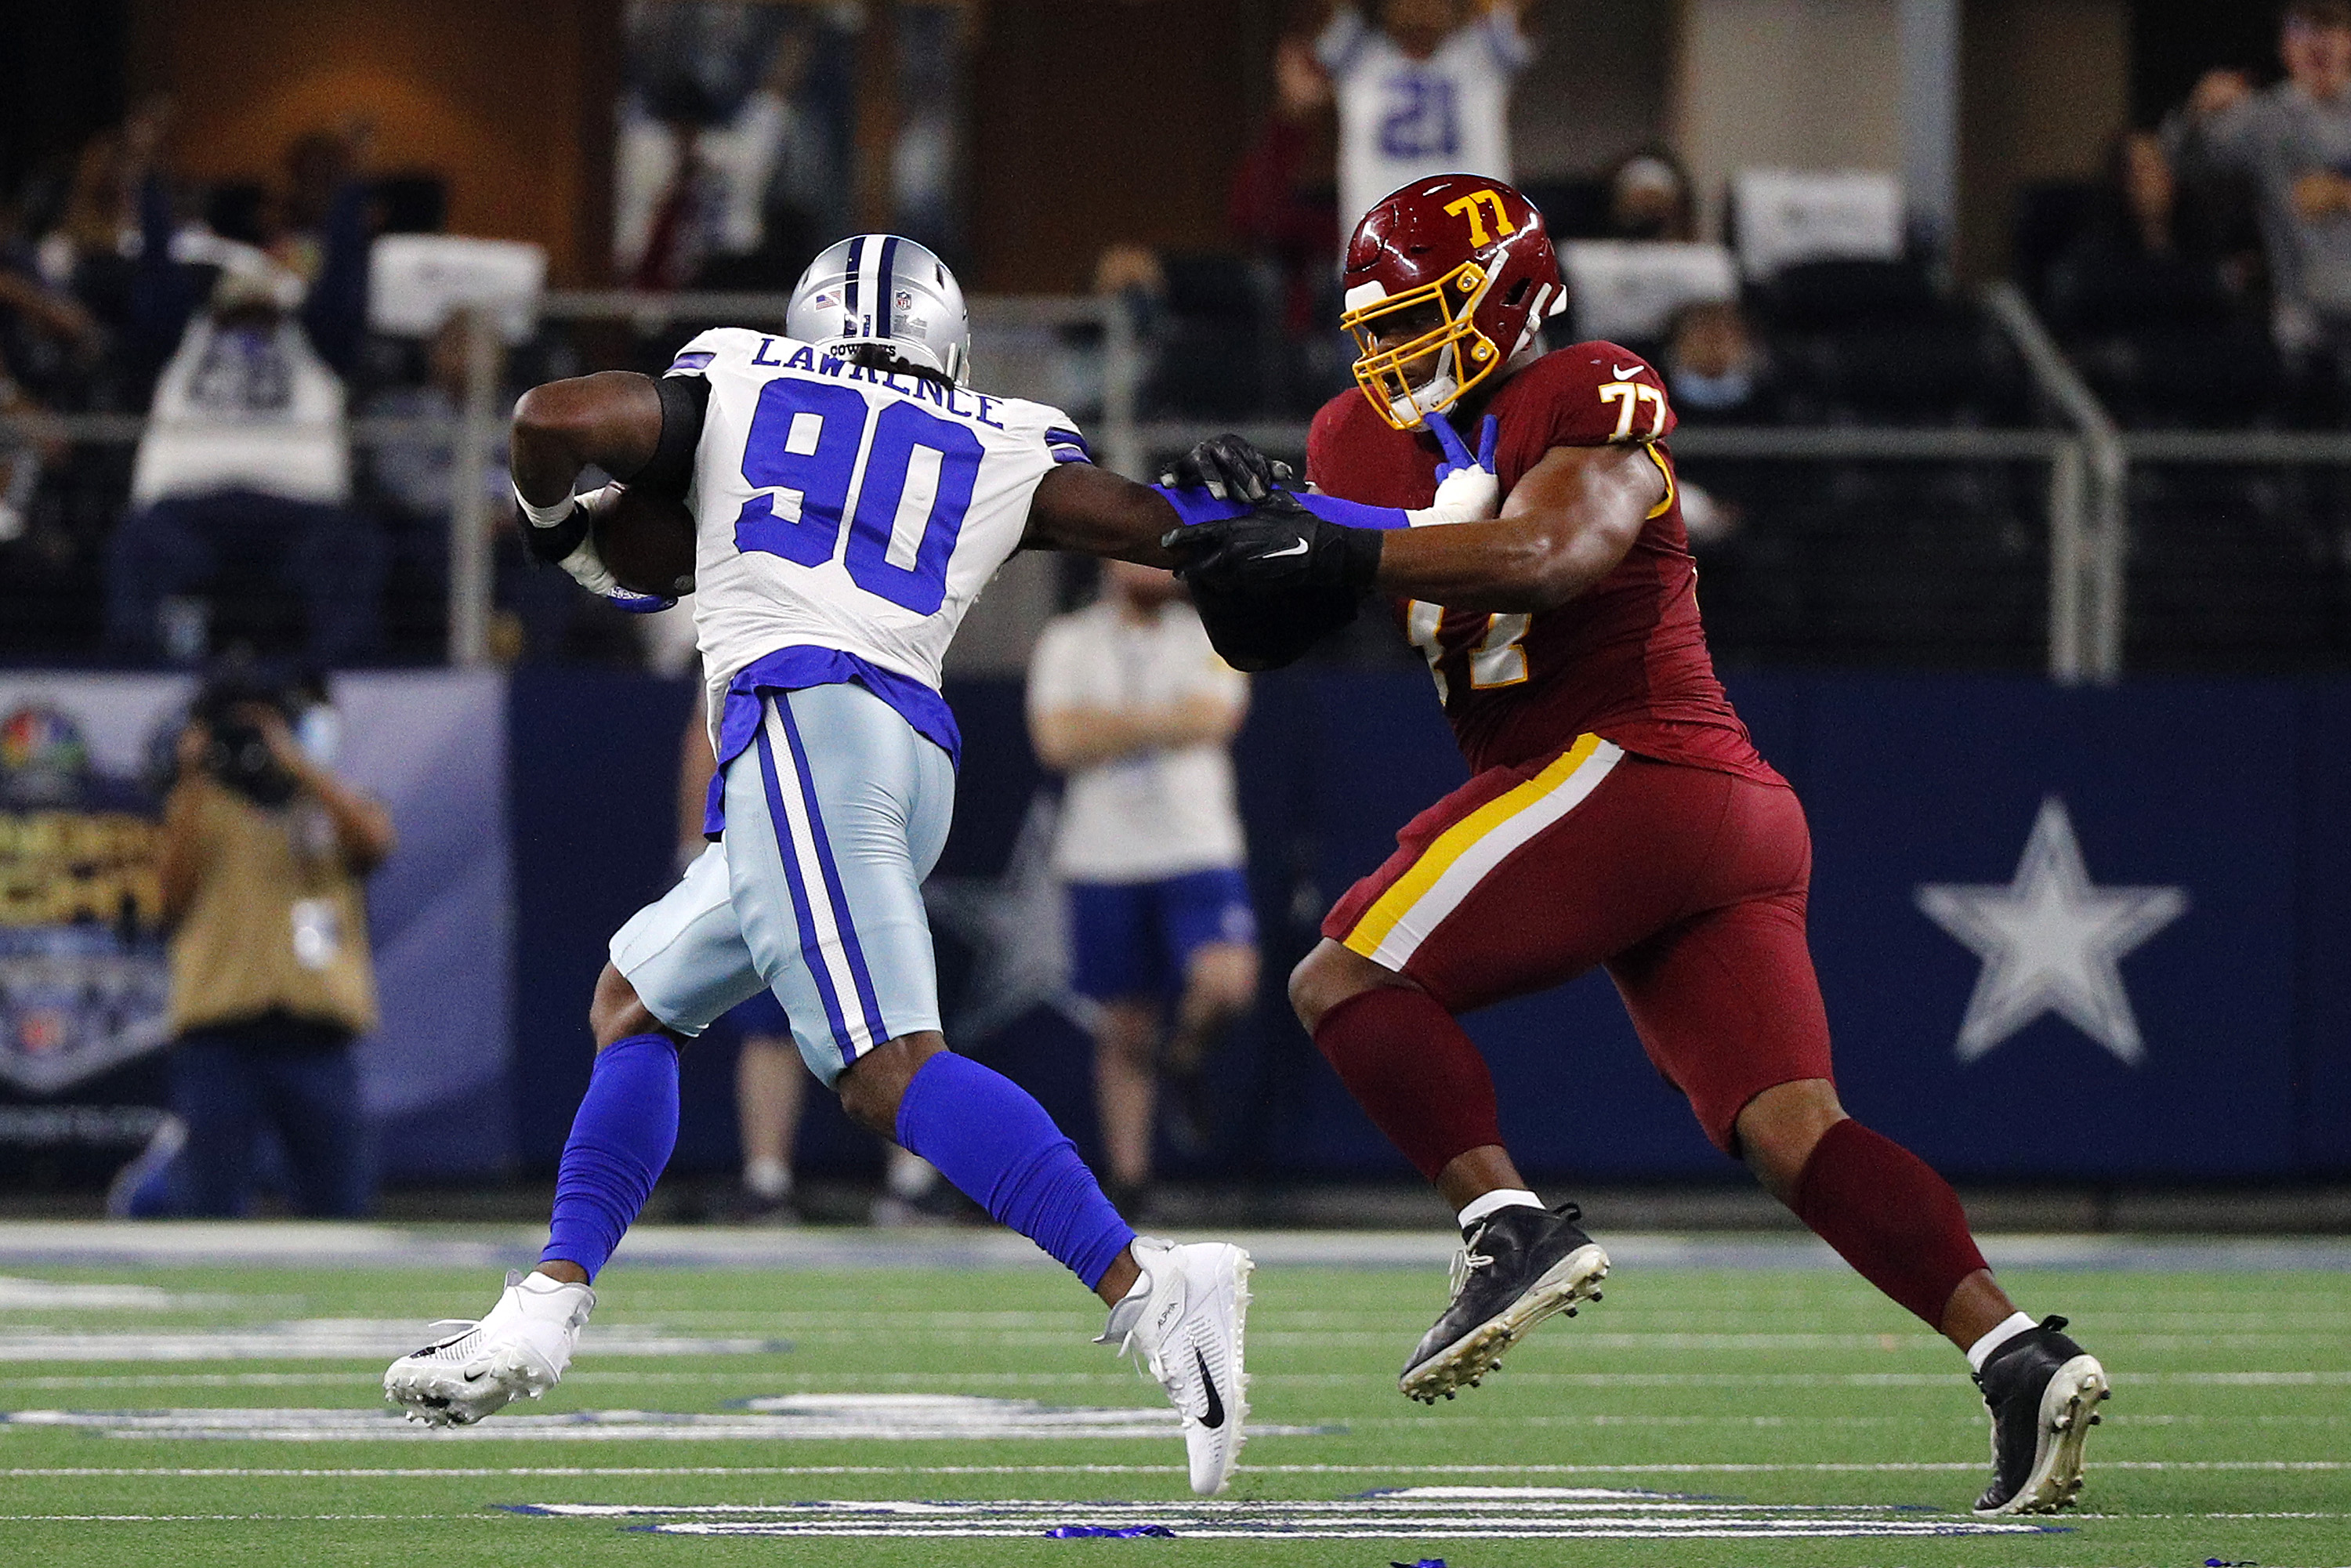 Demarcus Lawrence returns his interception for a touchdown.